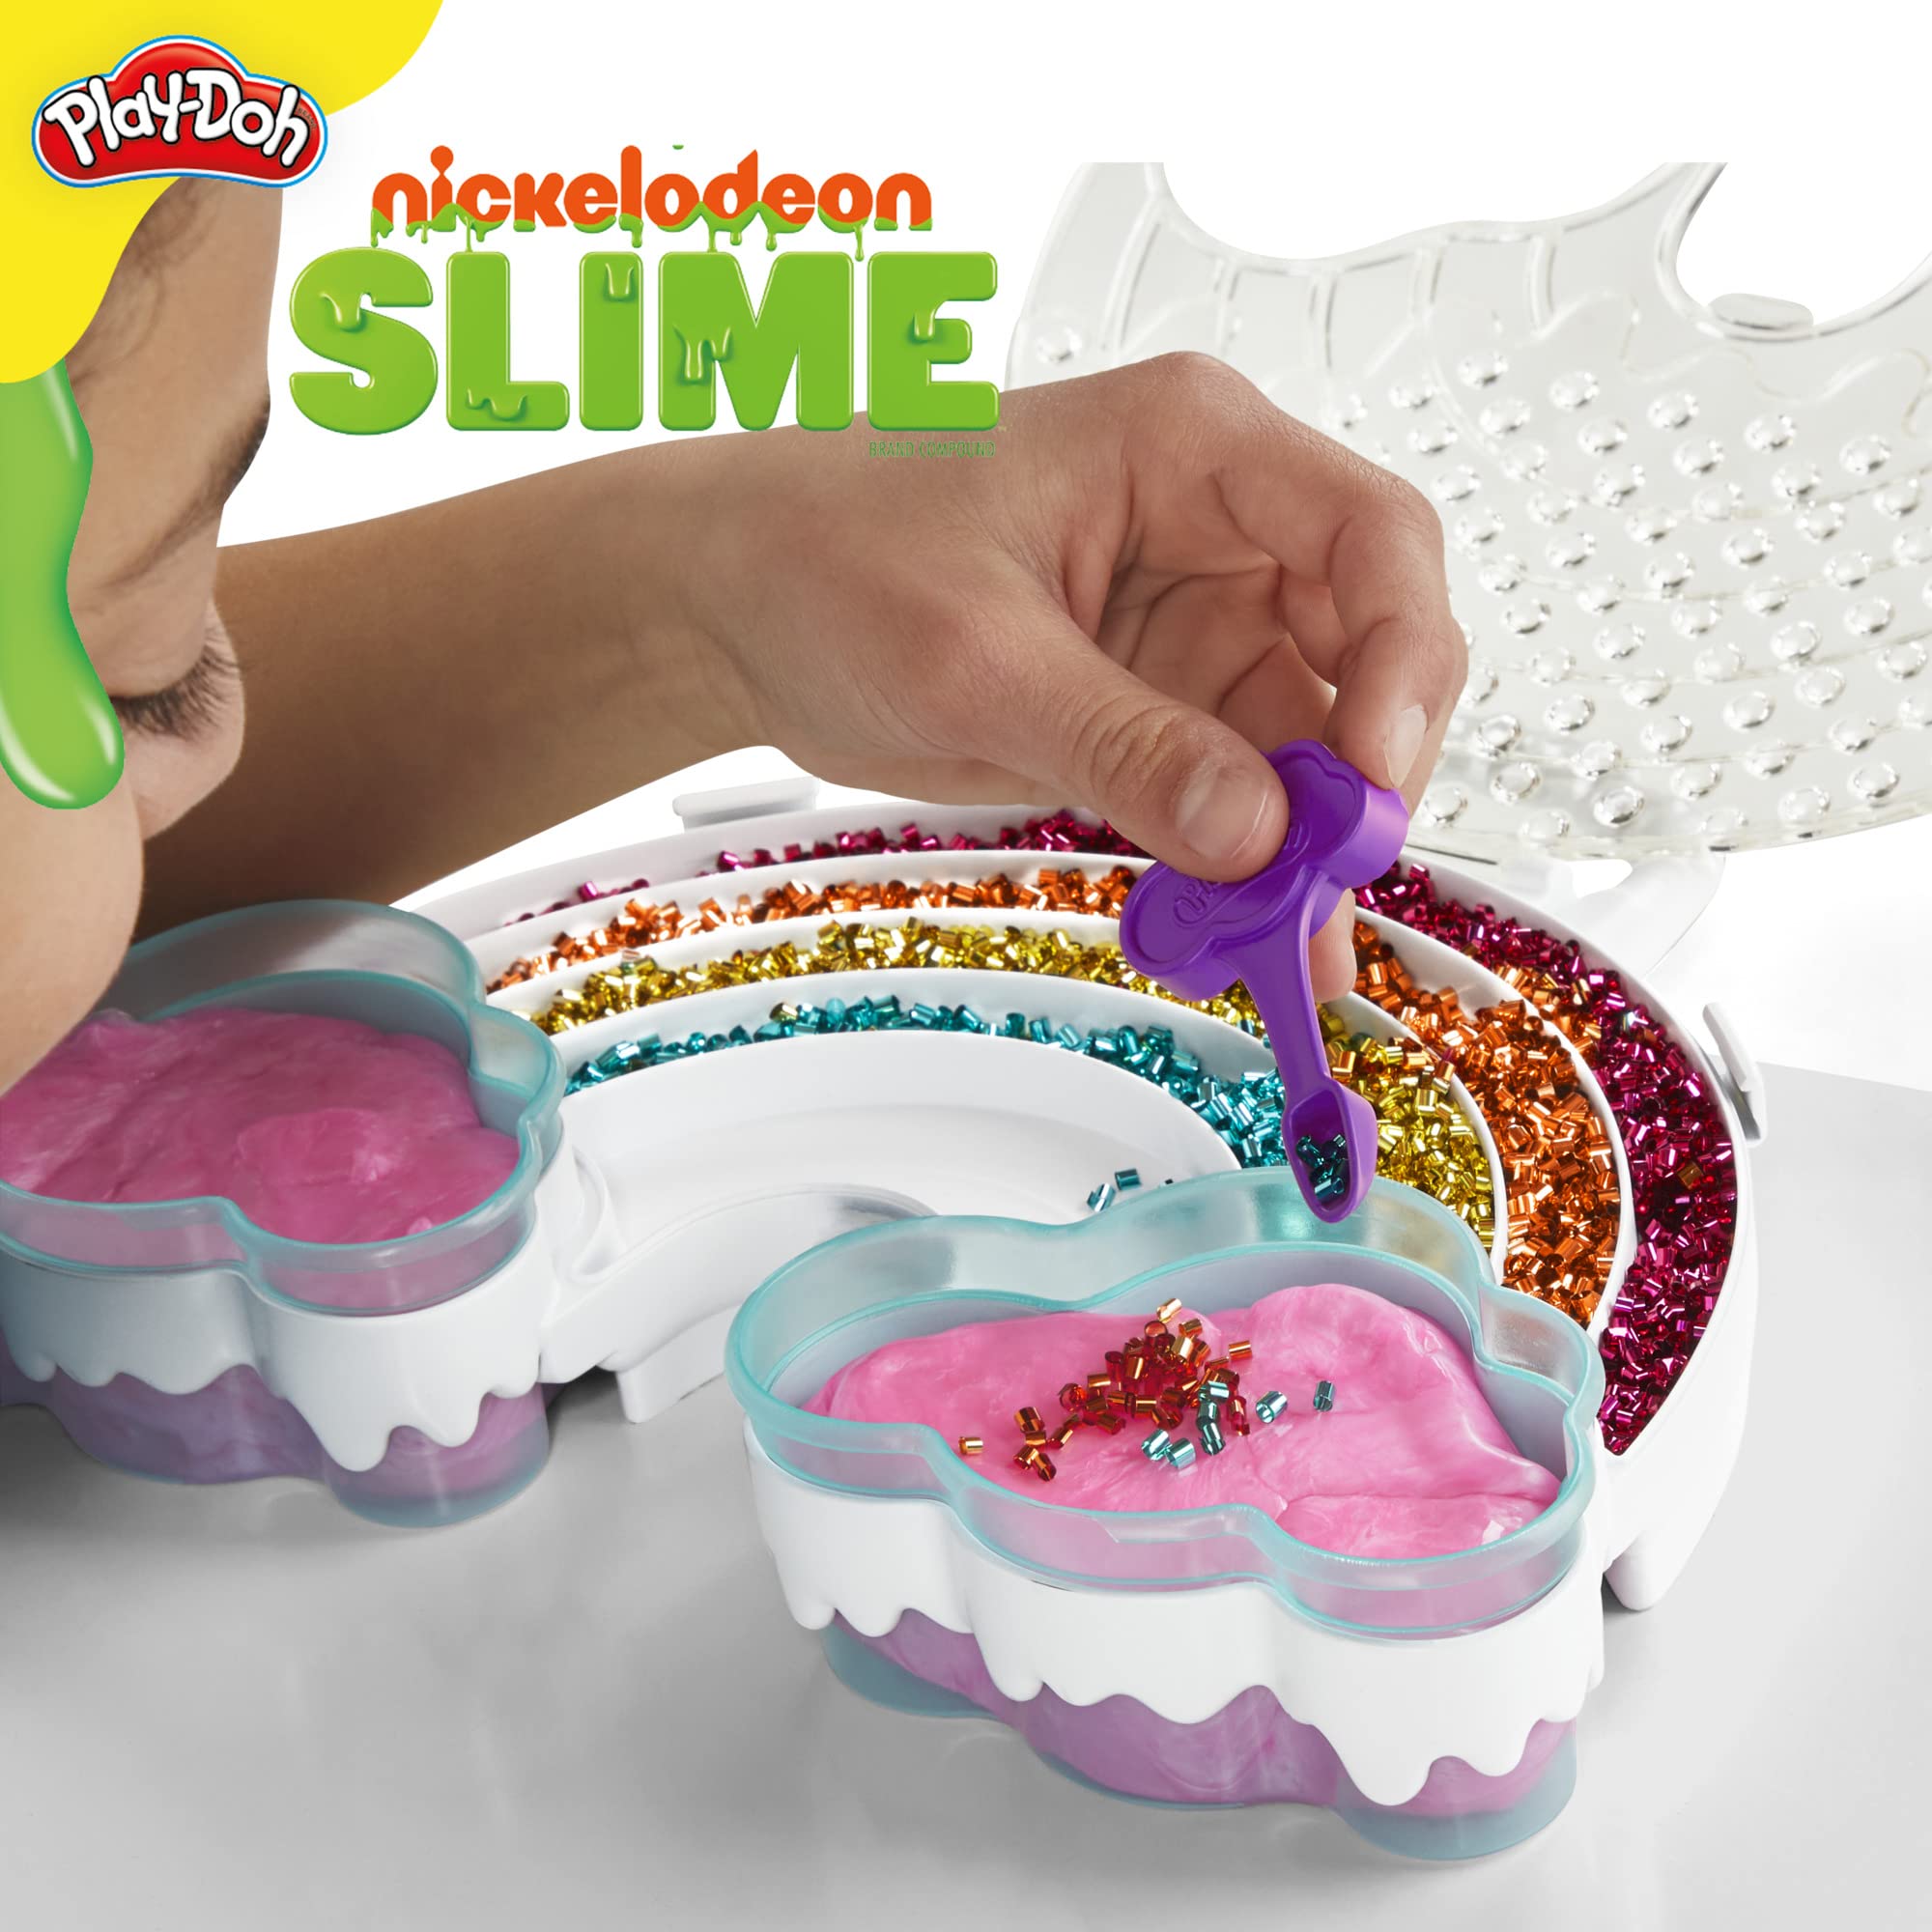 Play-Doh Nickelodeon Slime Brand Compound Rainbow Mixing Set, Pre Made with Add-in Charms, Kids Arts & Crafts Kit, Preschool Sensory Toys, Ages 4+ (Amazon Exclusive)